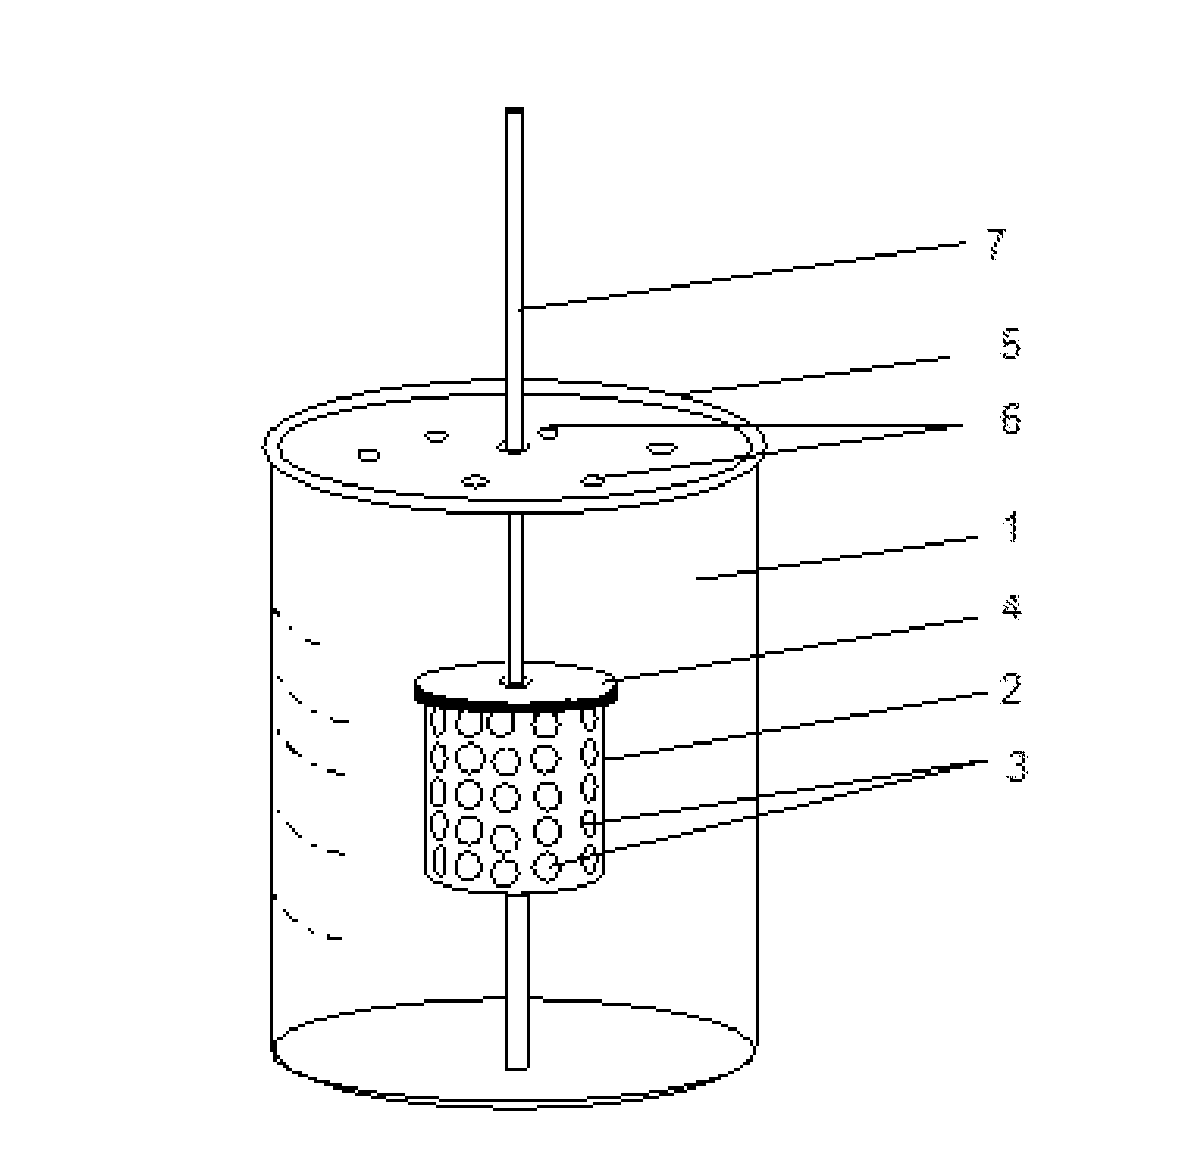 Personal Portable Device for Fermentation